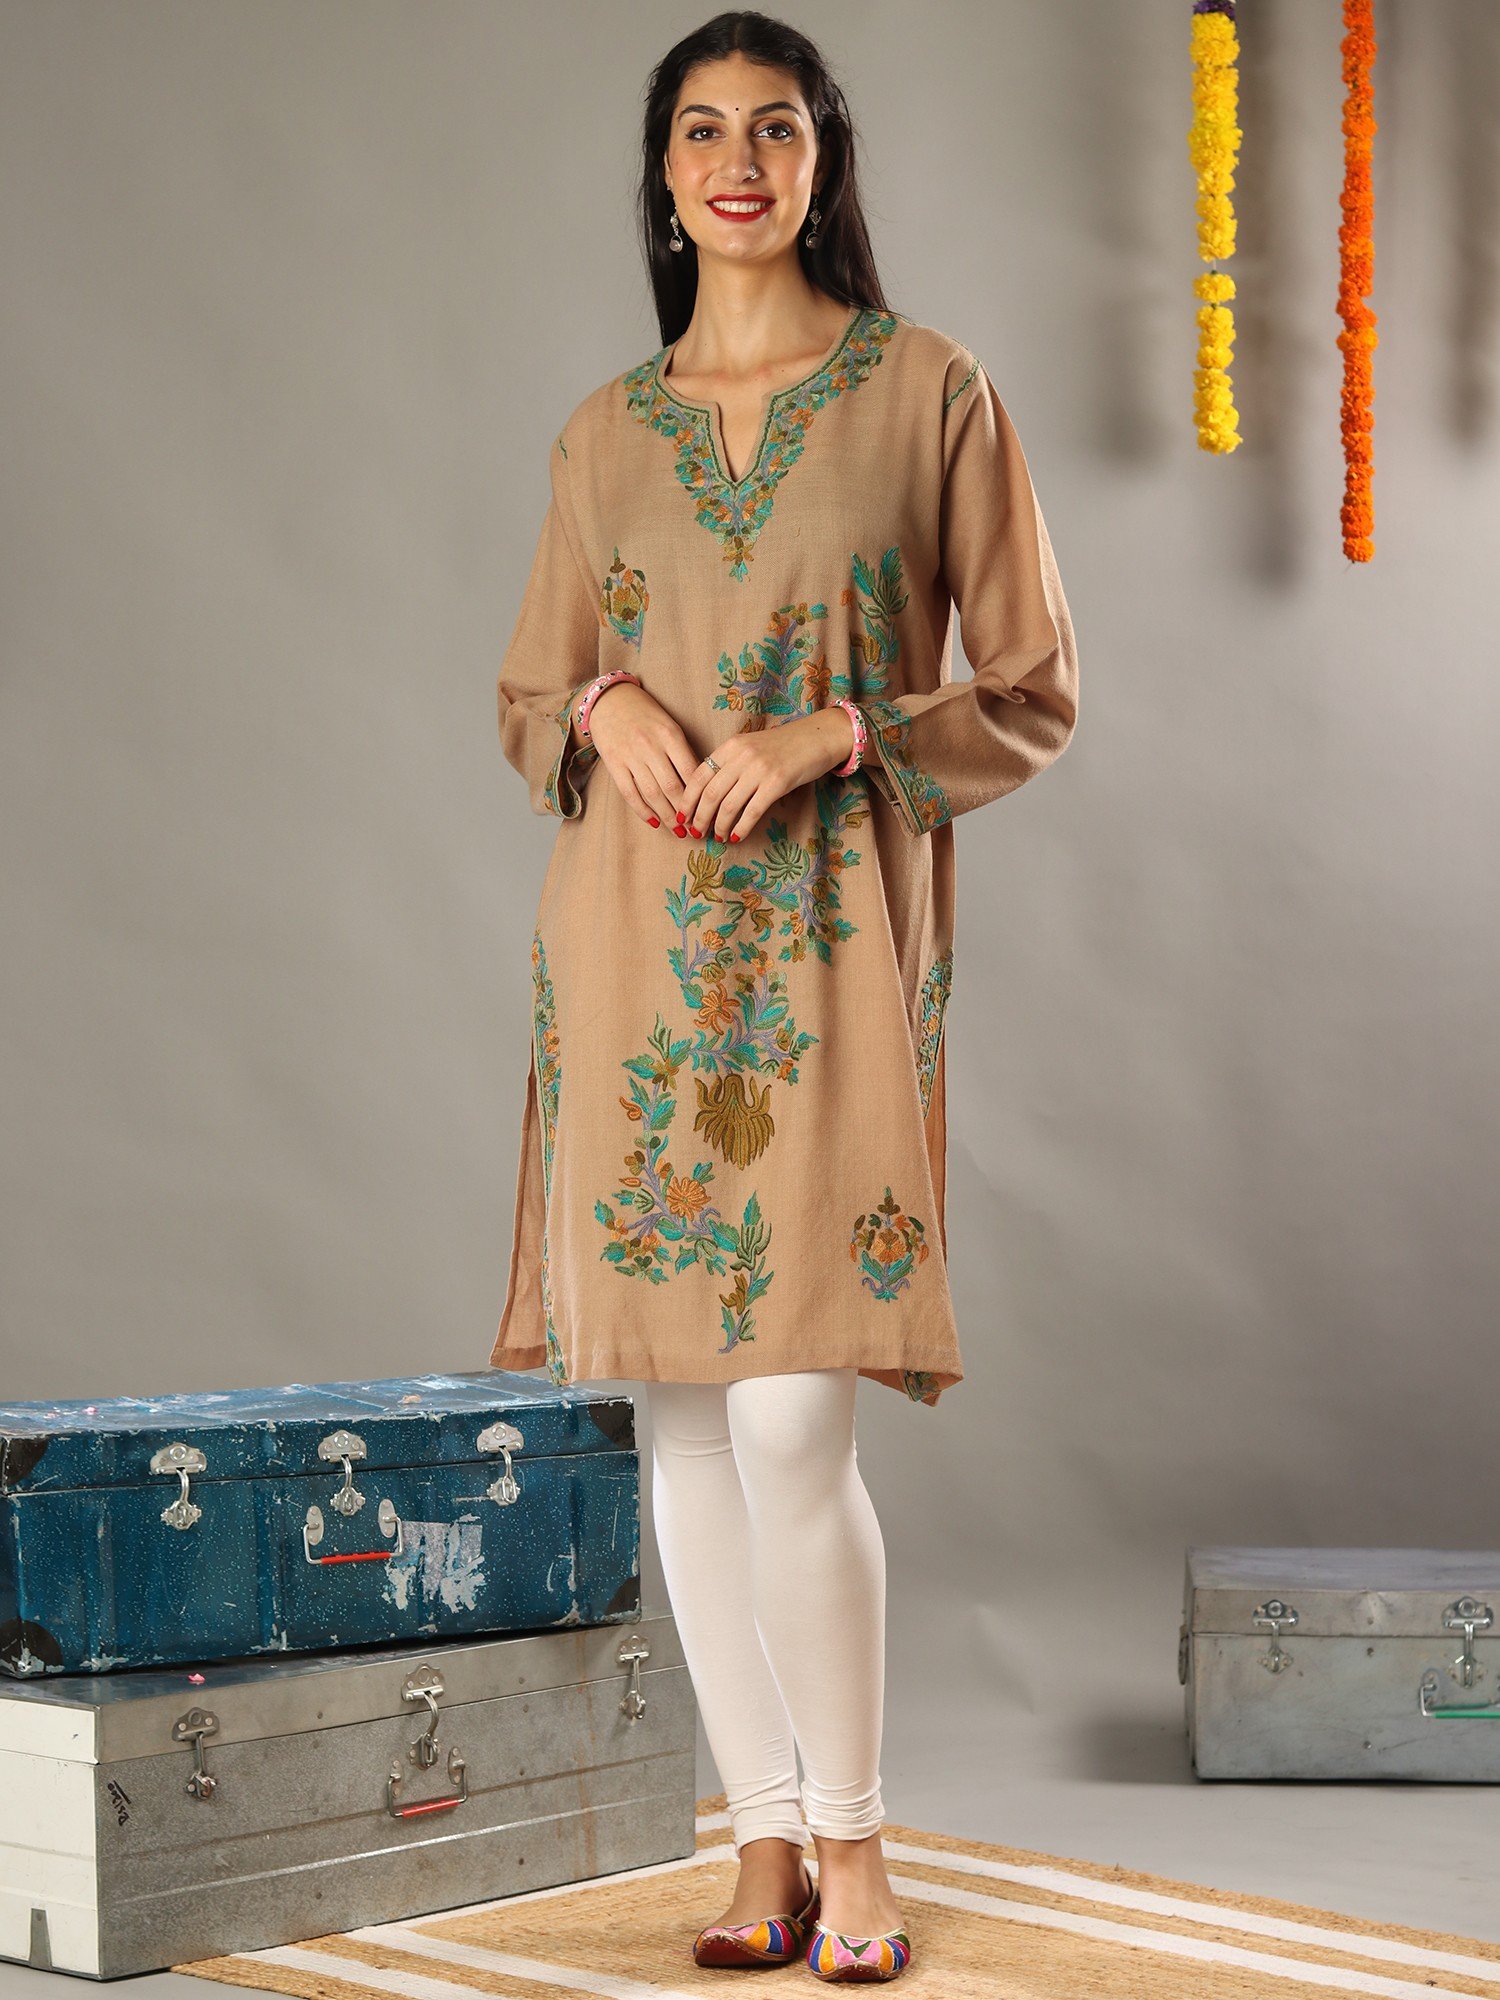 Buy Woolen Women Kurtis for Winter with Charming Kashmiri Embroidery Warm  and Beautiful Unique Product Best for Cold Weather Free Size at Amazon.in